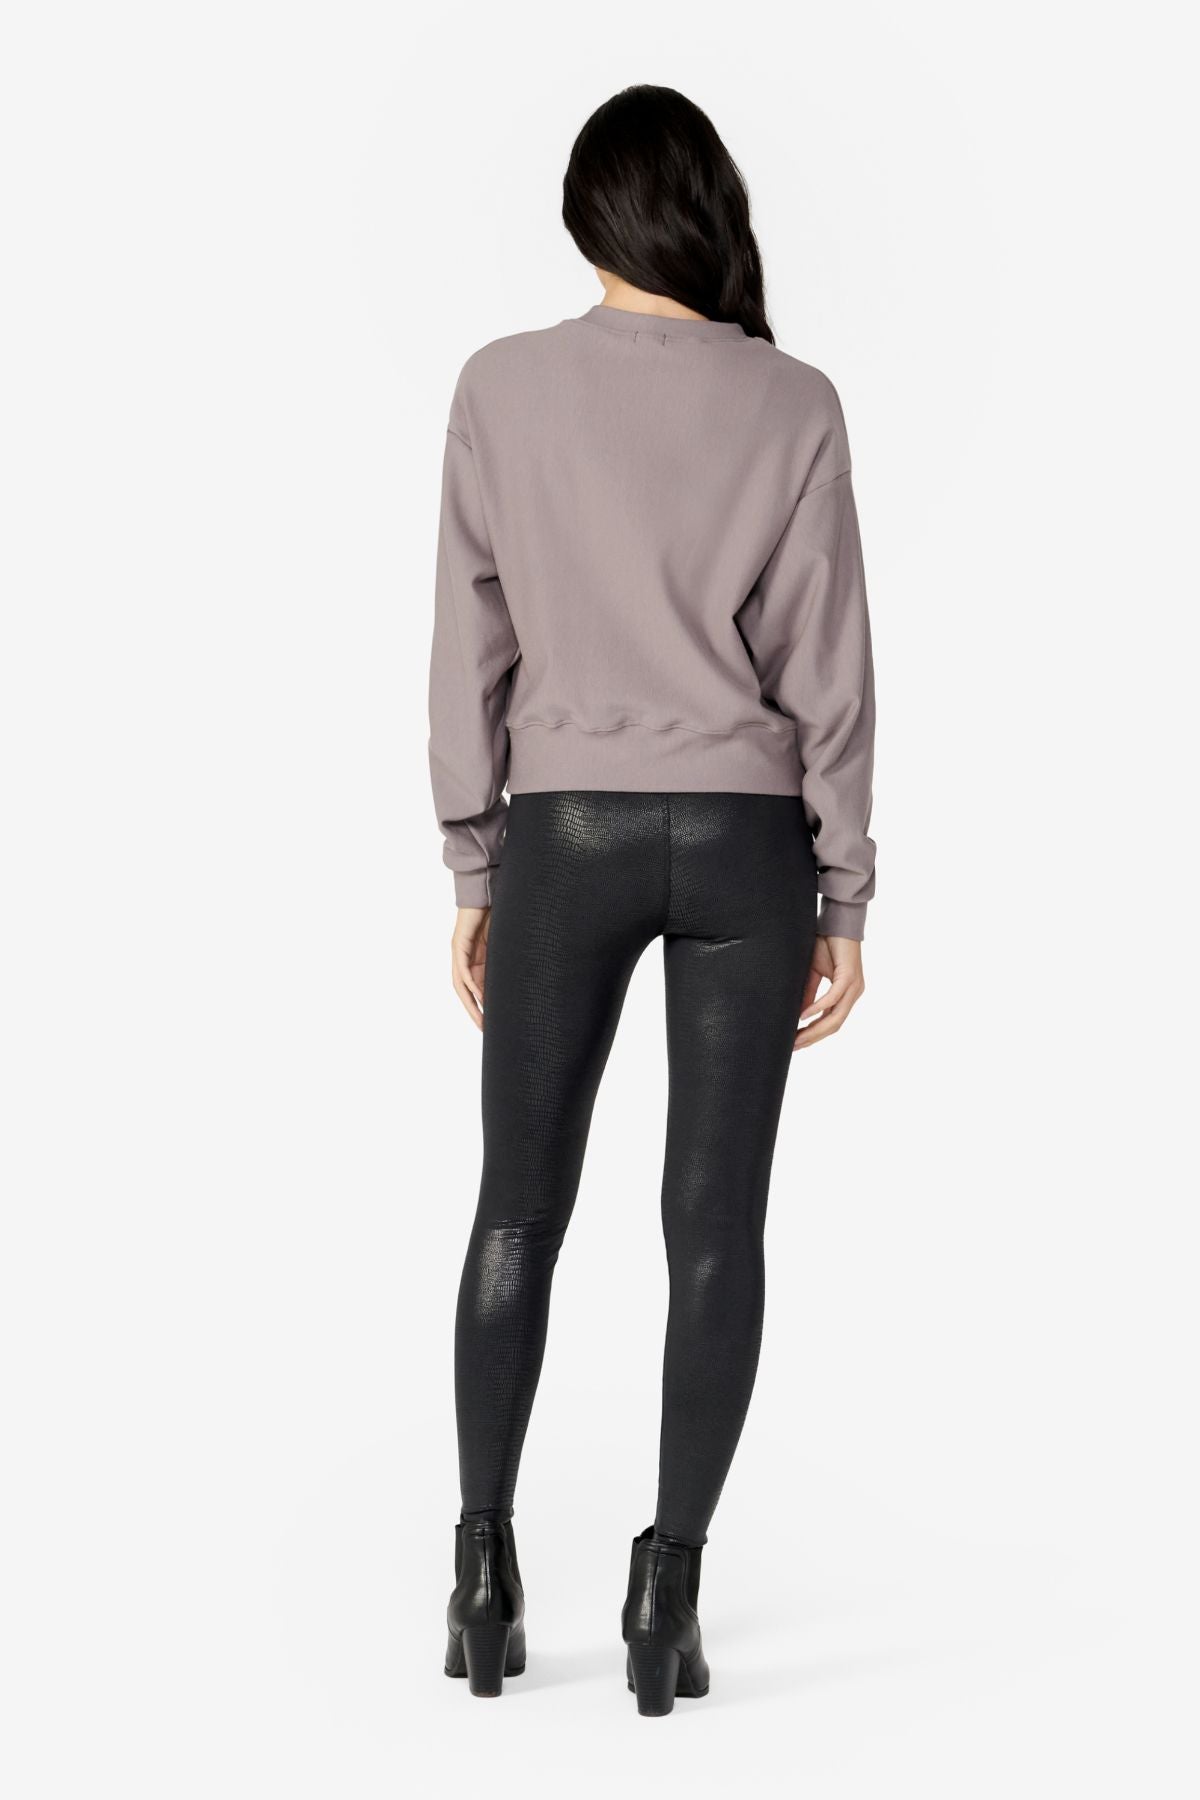 girl back side wearing a light grey long sleeves sweater with black leggings